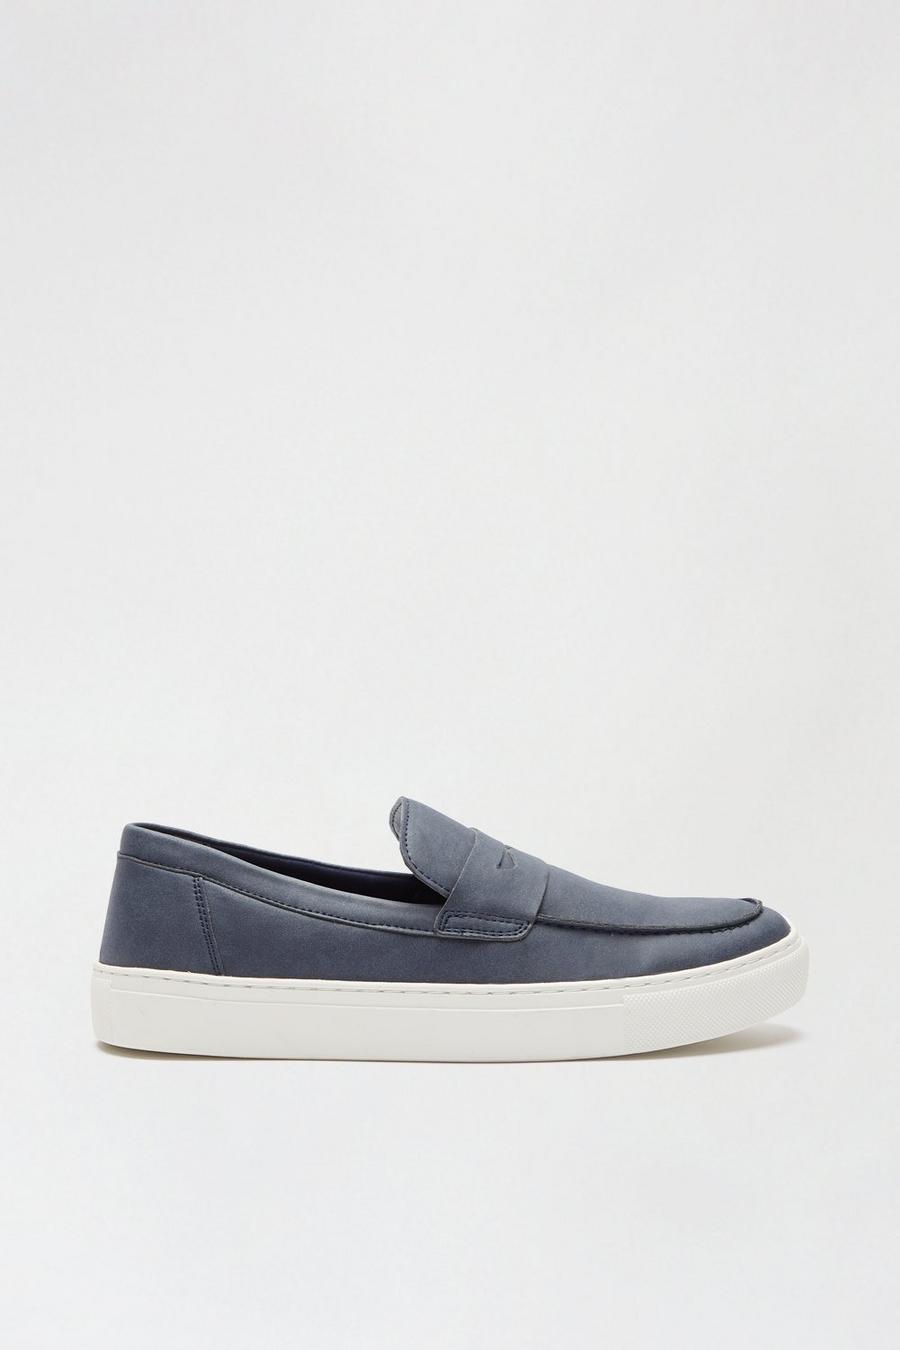 Suede Look Slip On Shoes